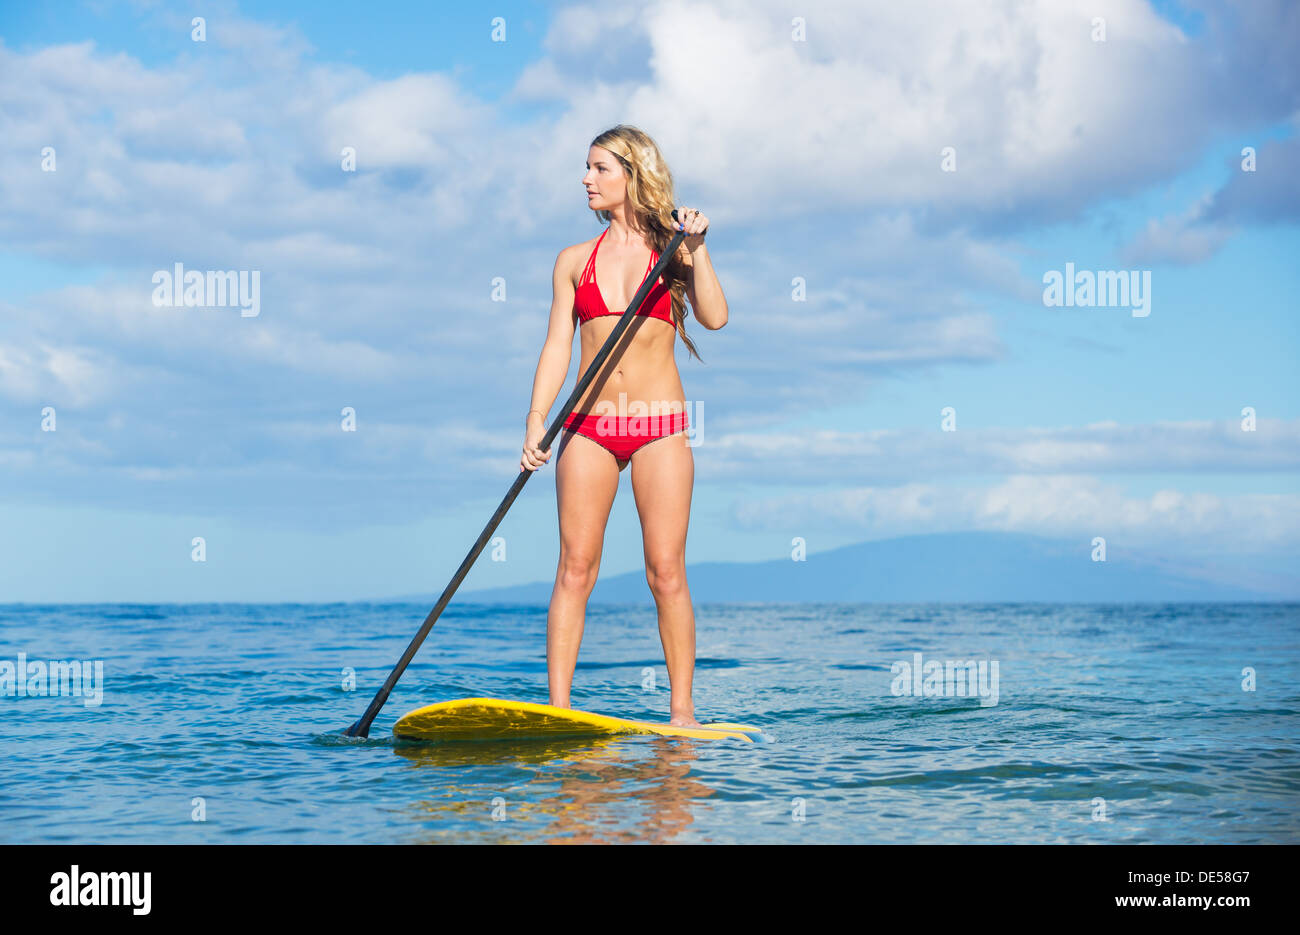 Young Attractive Woman on Stand Up Paddle Board, SUP, in the Blue Waters off Hawaii, Active Life Concept Stock Photo